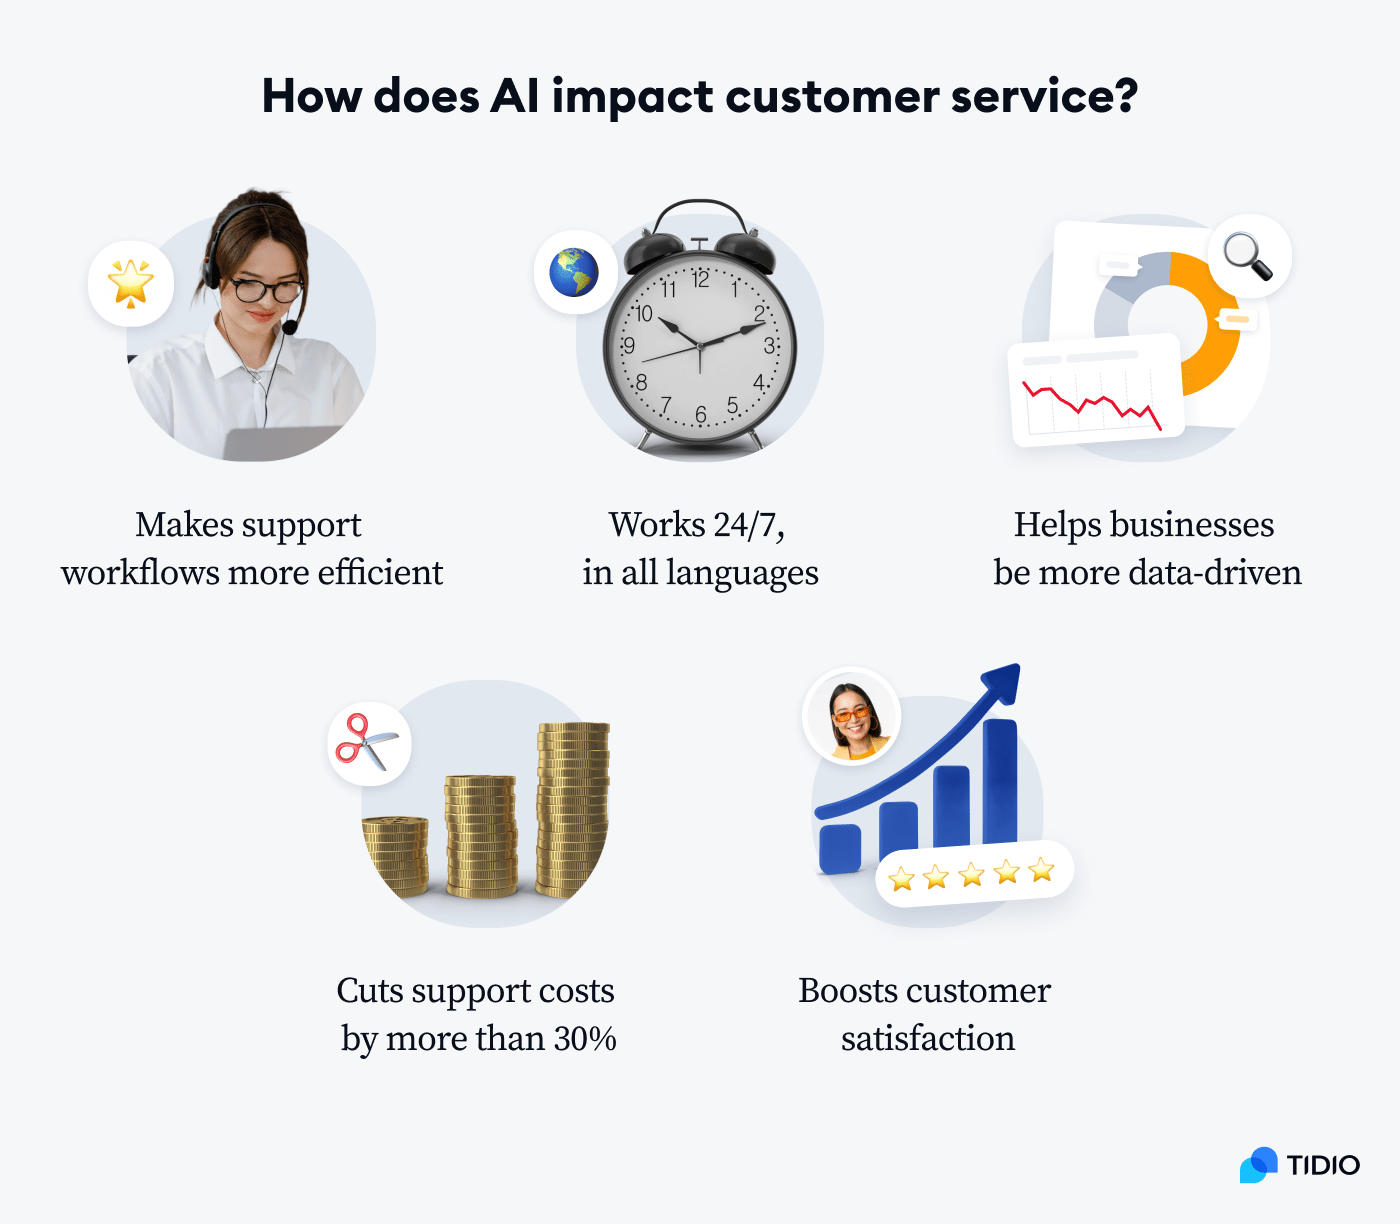 Key business benefits of AI in customer service